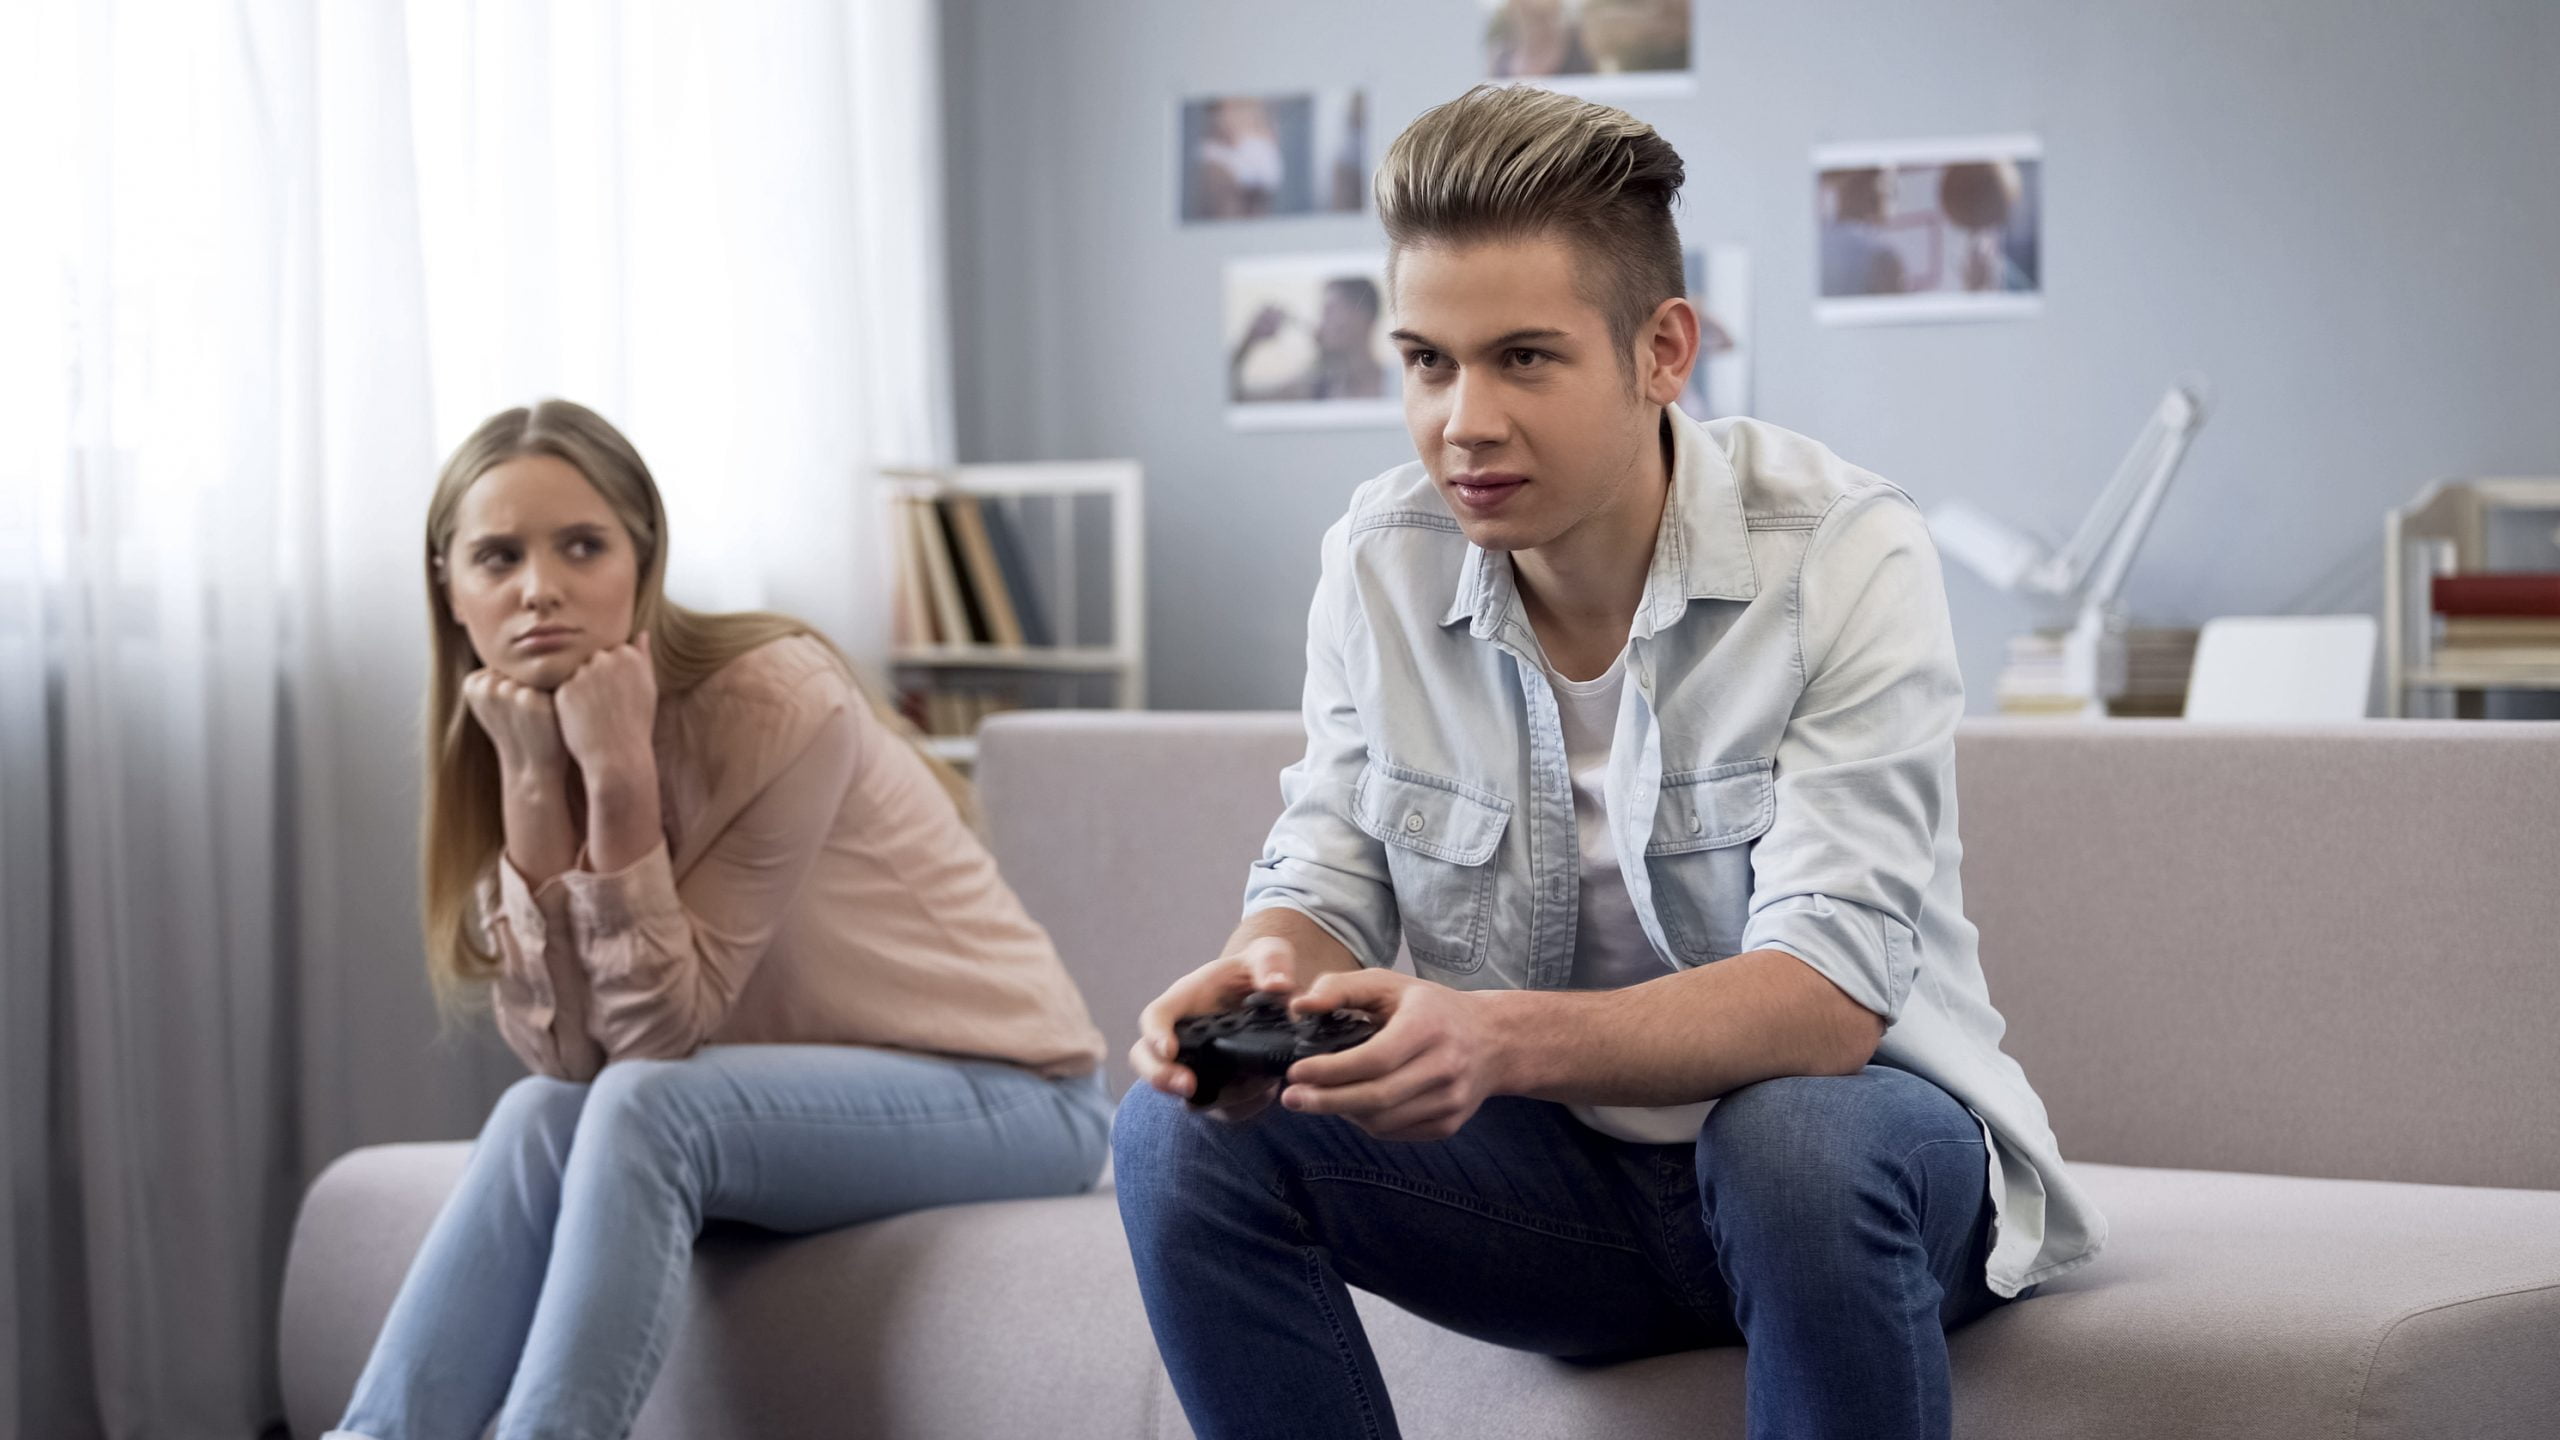 My Boyfriend Is Addicted To Video Games – What To Do